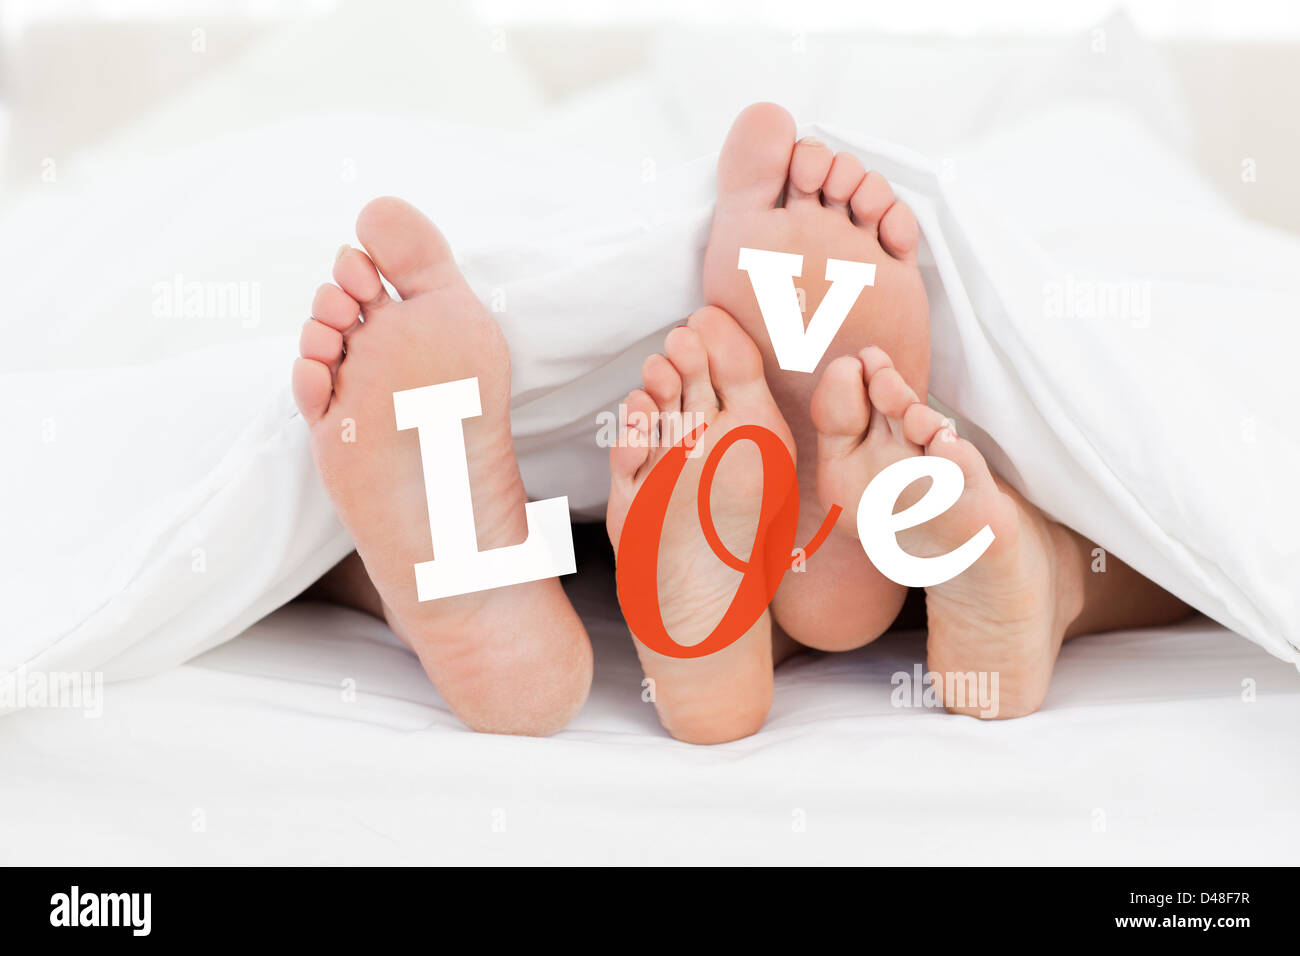 Pair of feet under duvet with love text Stock Photo